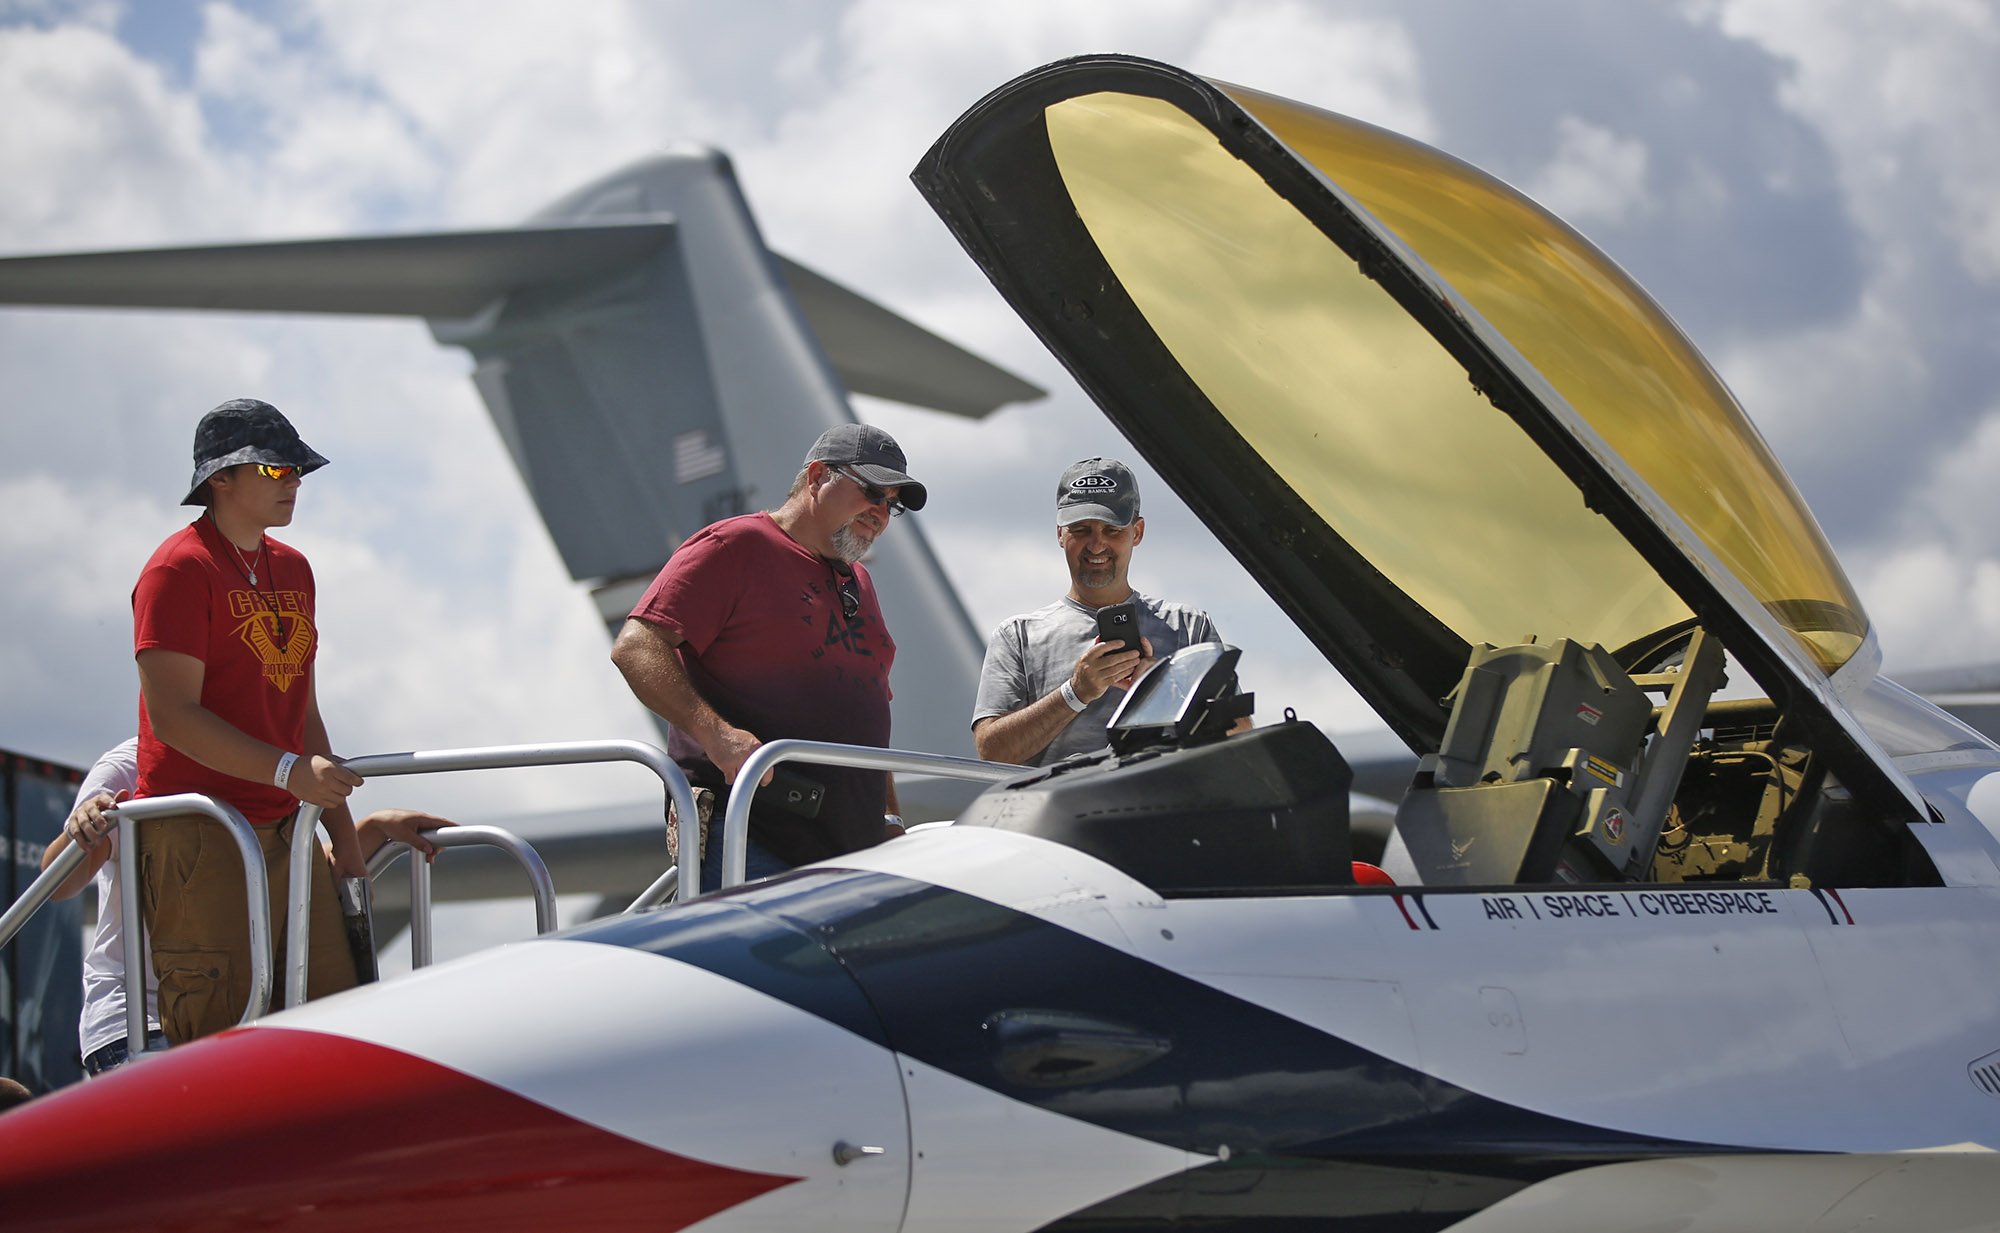 Dayton Air Show could be voted top Air Show in United States